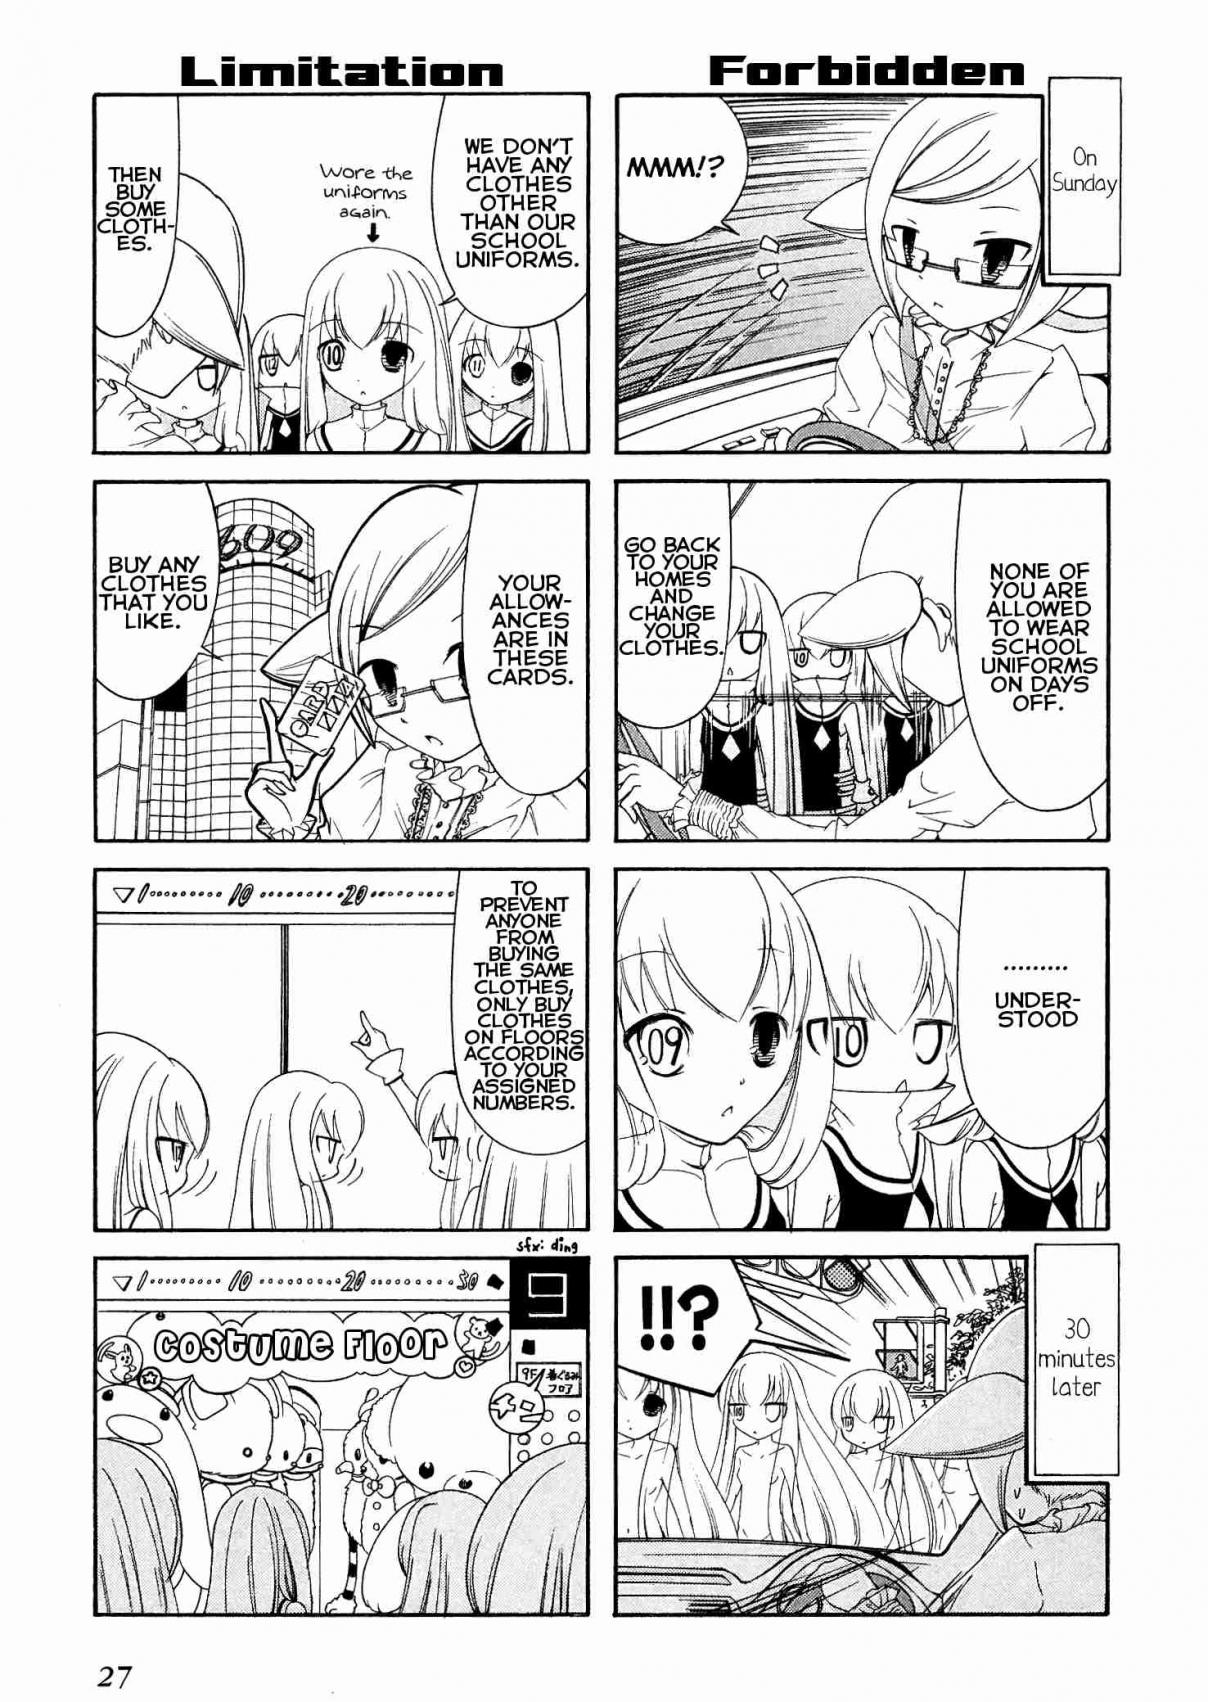 Number Girl Vol. 1 Ch. 3